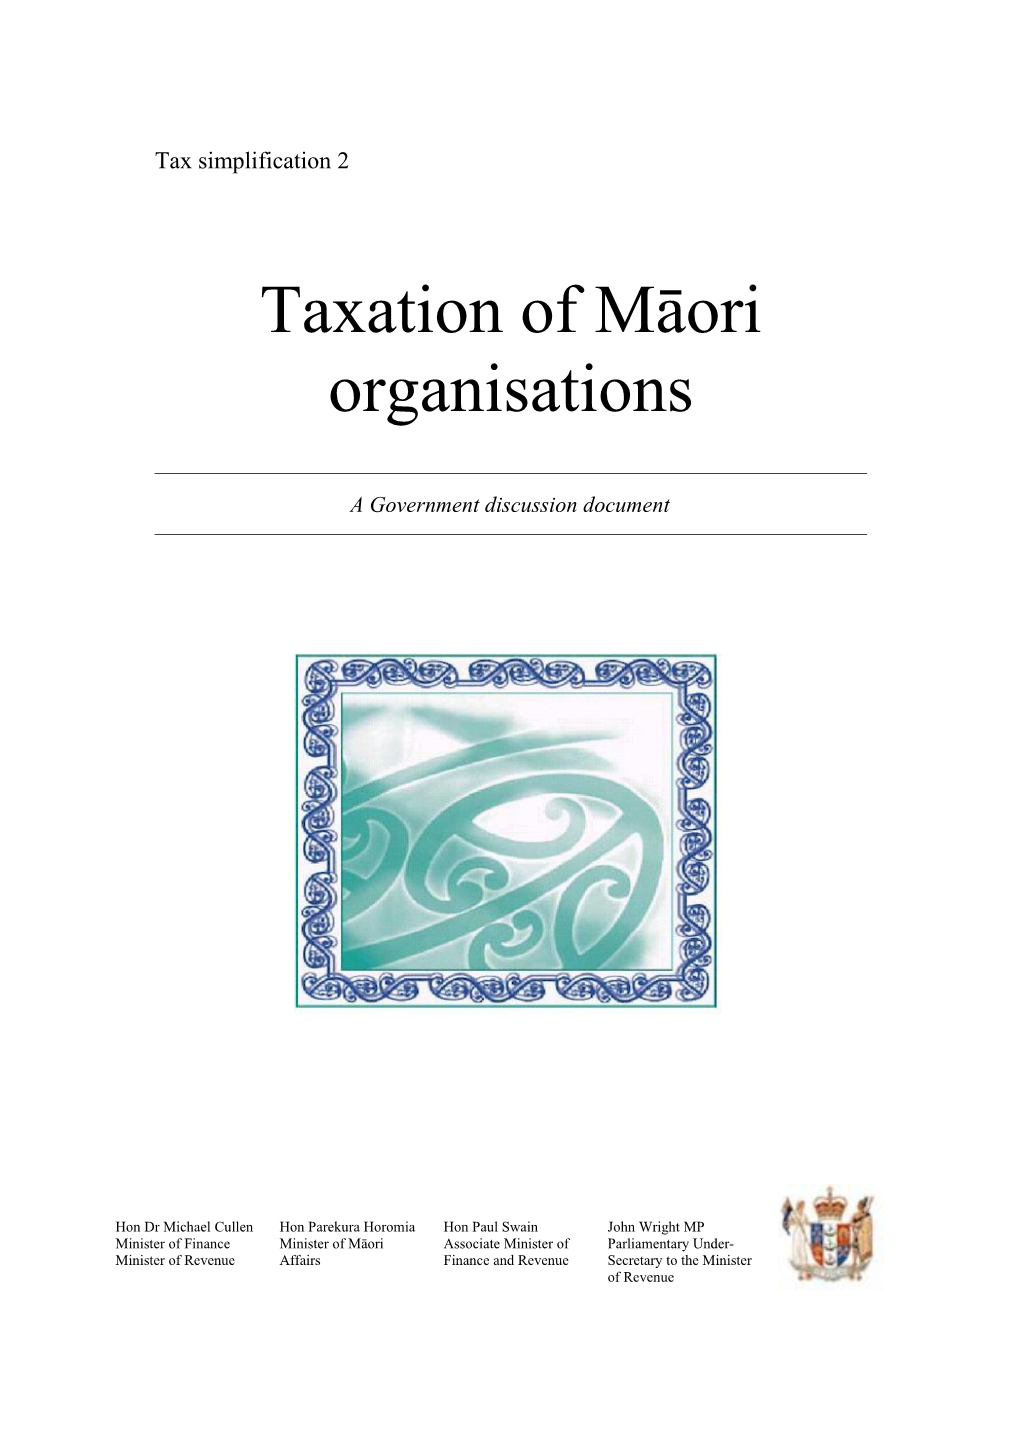 Taxation of Maori Organisations: a Government Discussion Document